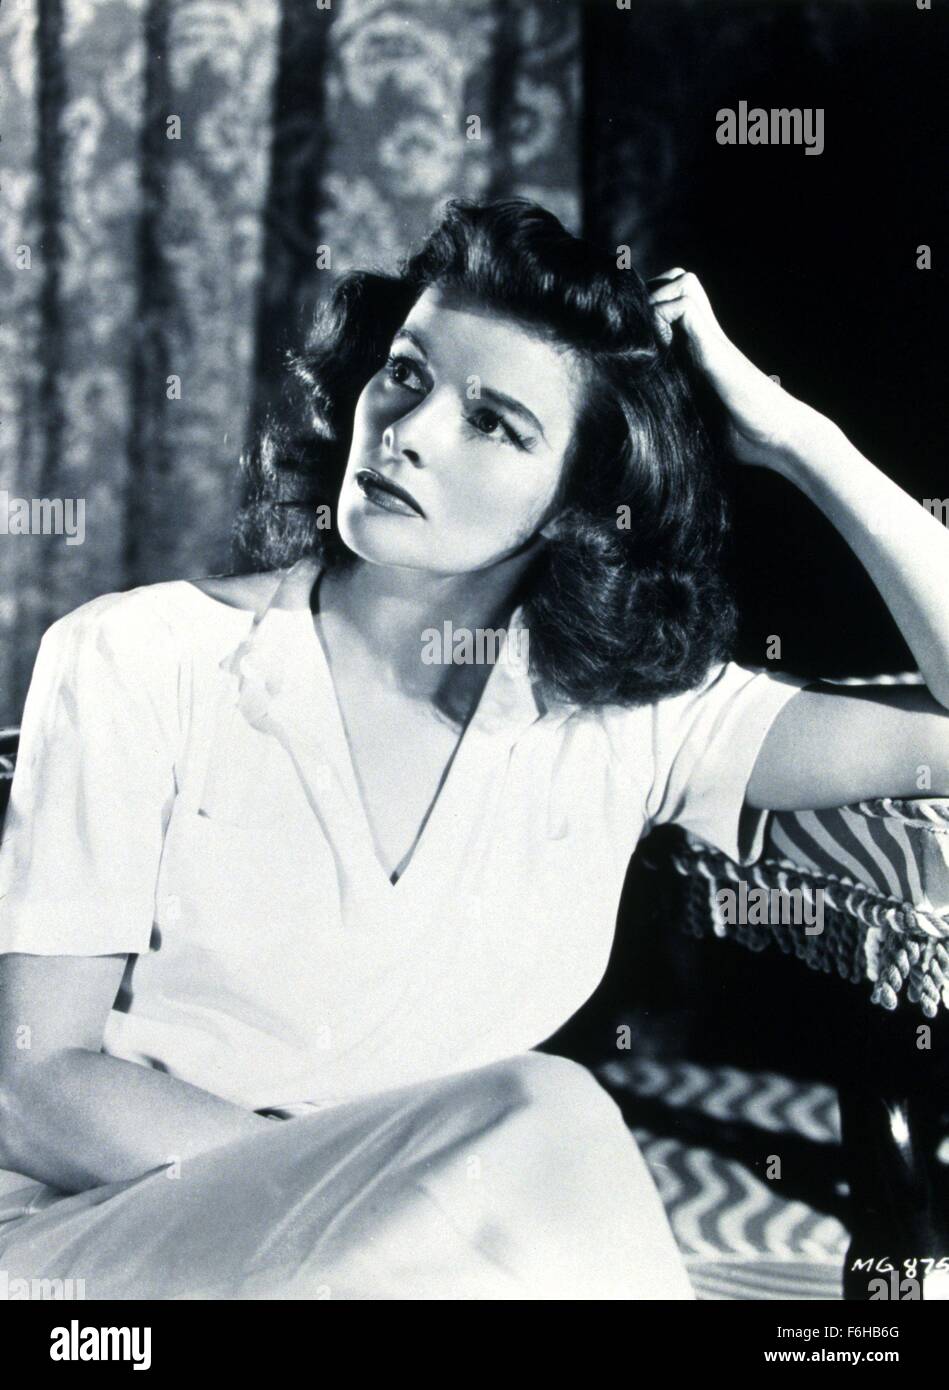 1940, Film Title: PHILADELPHIA STORY, Director: GEORGE CUKOR, Studio: MGM, Pictured: GEORGE CUKOR, KATHARINE HEPBURN, HEAD IN HAND, SITTING, SEATED, LEGS CROSSED, CASUAL, RELAXED, FILM STILL. (Credit Image: SNAP) Stock Photo